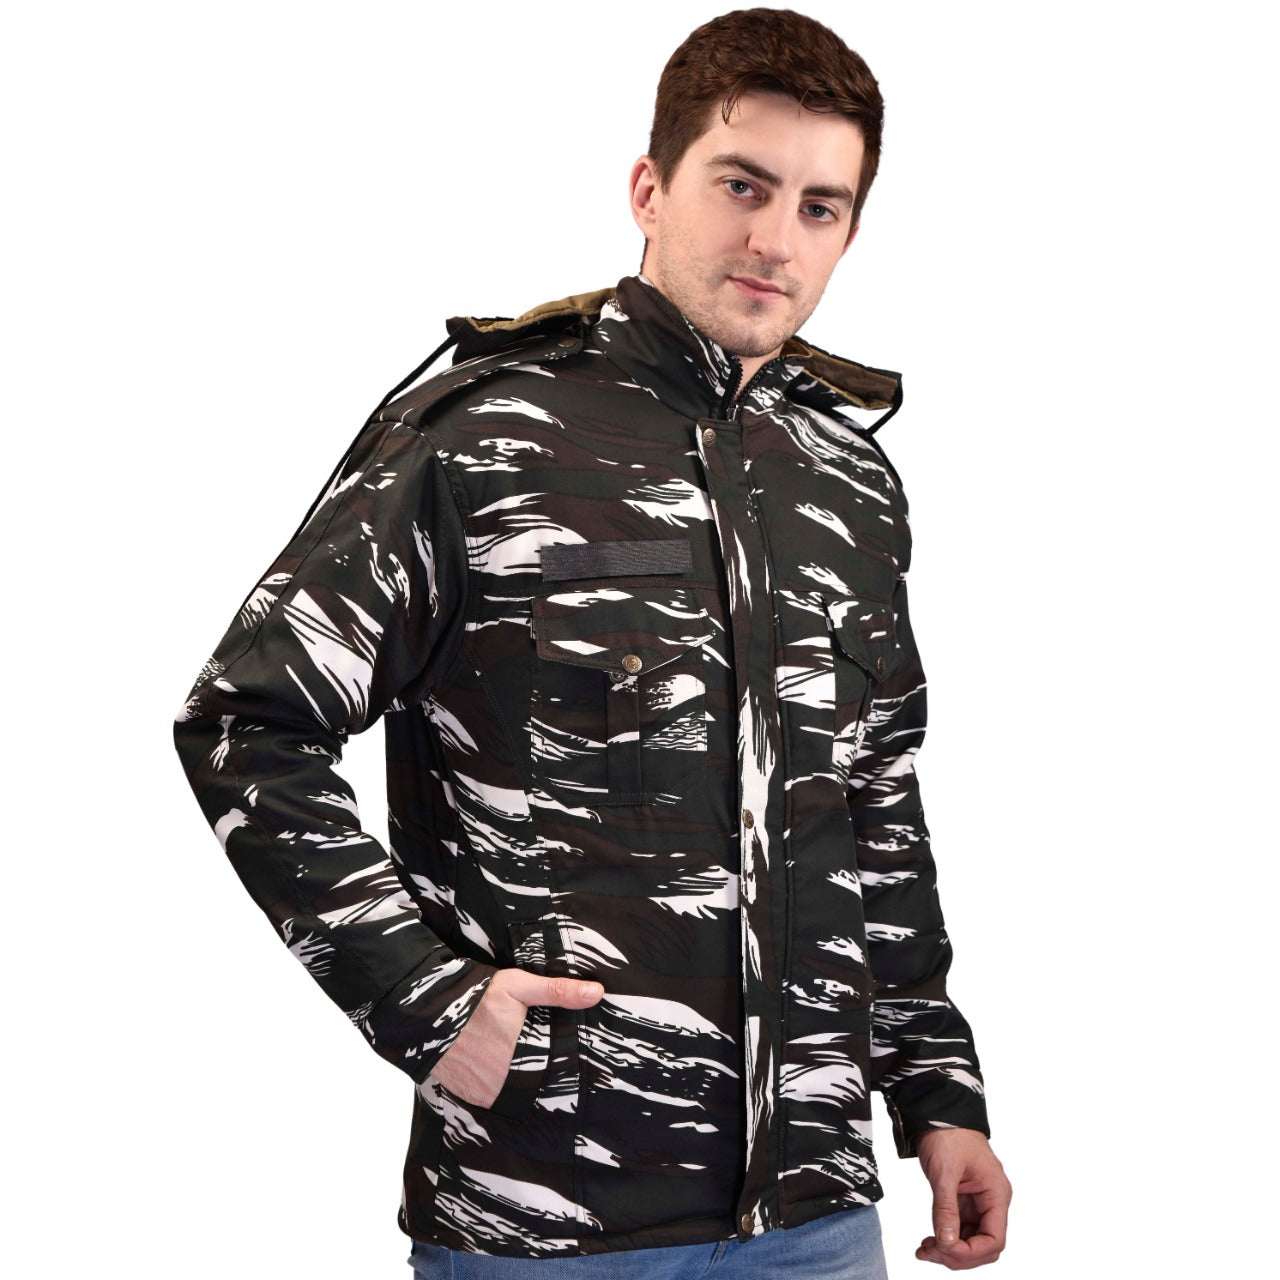 CRPF Unisex Windproof Parachute Jacket Camouflage Khaki Both Side Quilted Full Sleeves Hooded Neck Army Military Defence